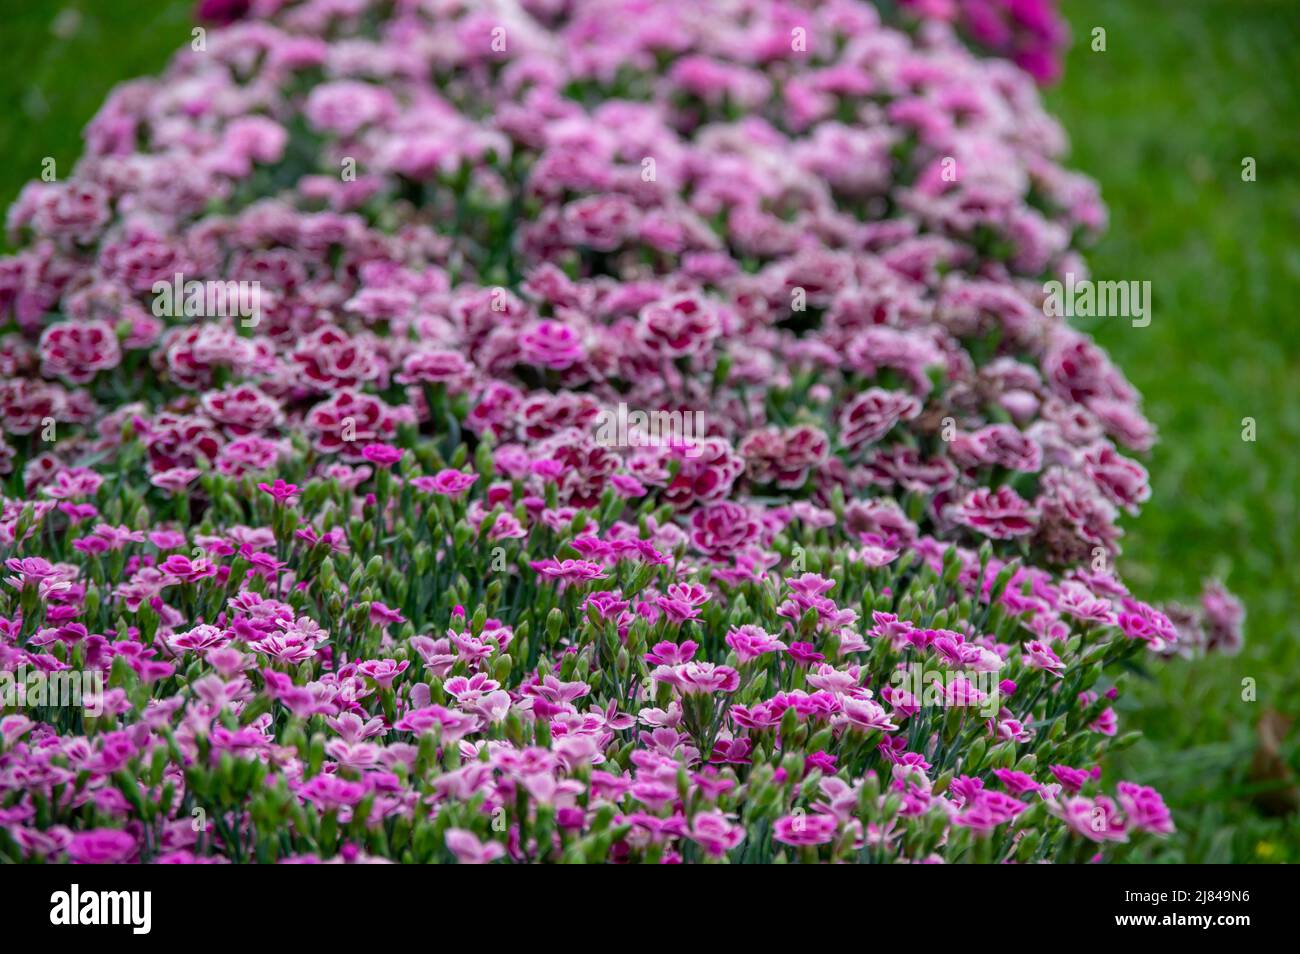 Lots of clove pink carnation flowers blossoming with green grass in the background Stock Photo